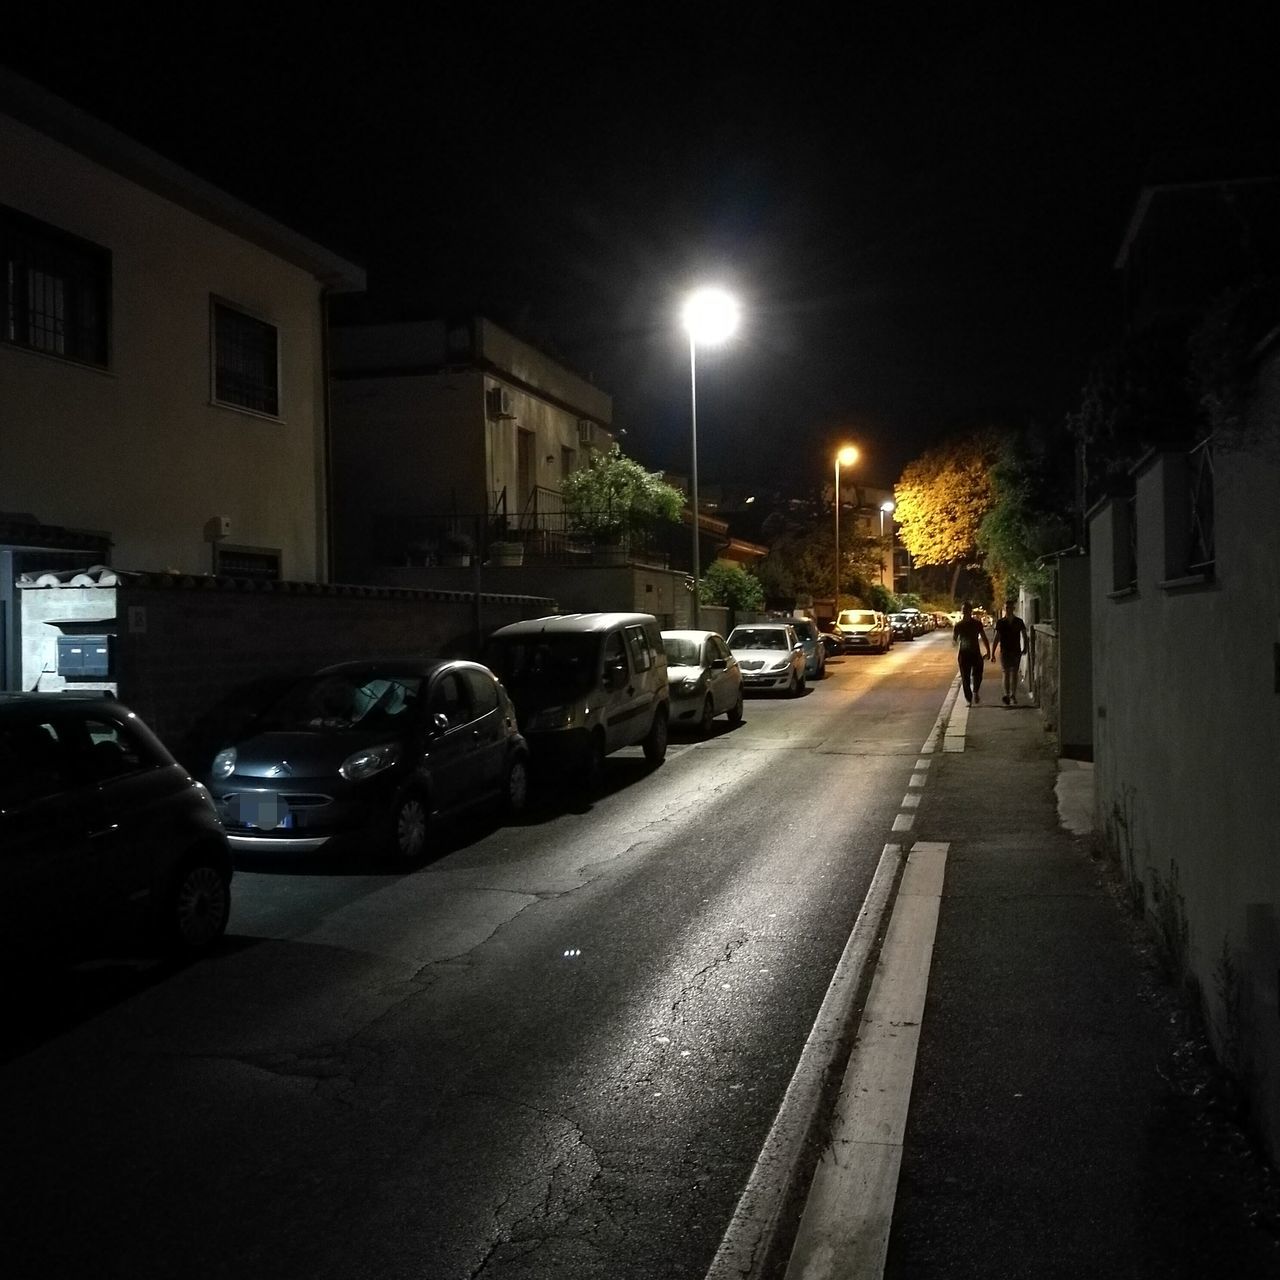 CARS ON ROAD BY ILLUMINATED BUILDINGS AT NIGHT